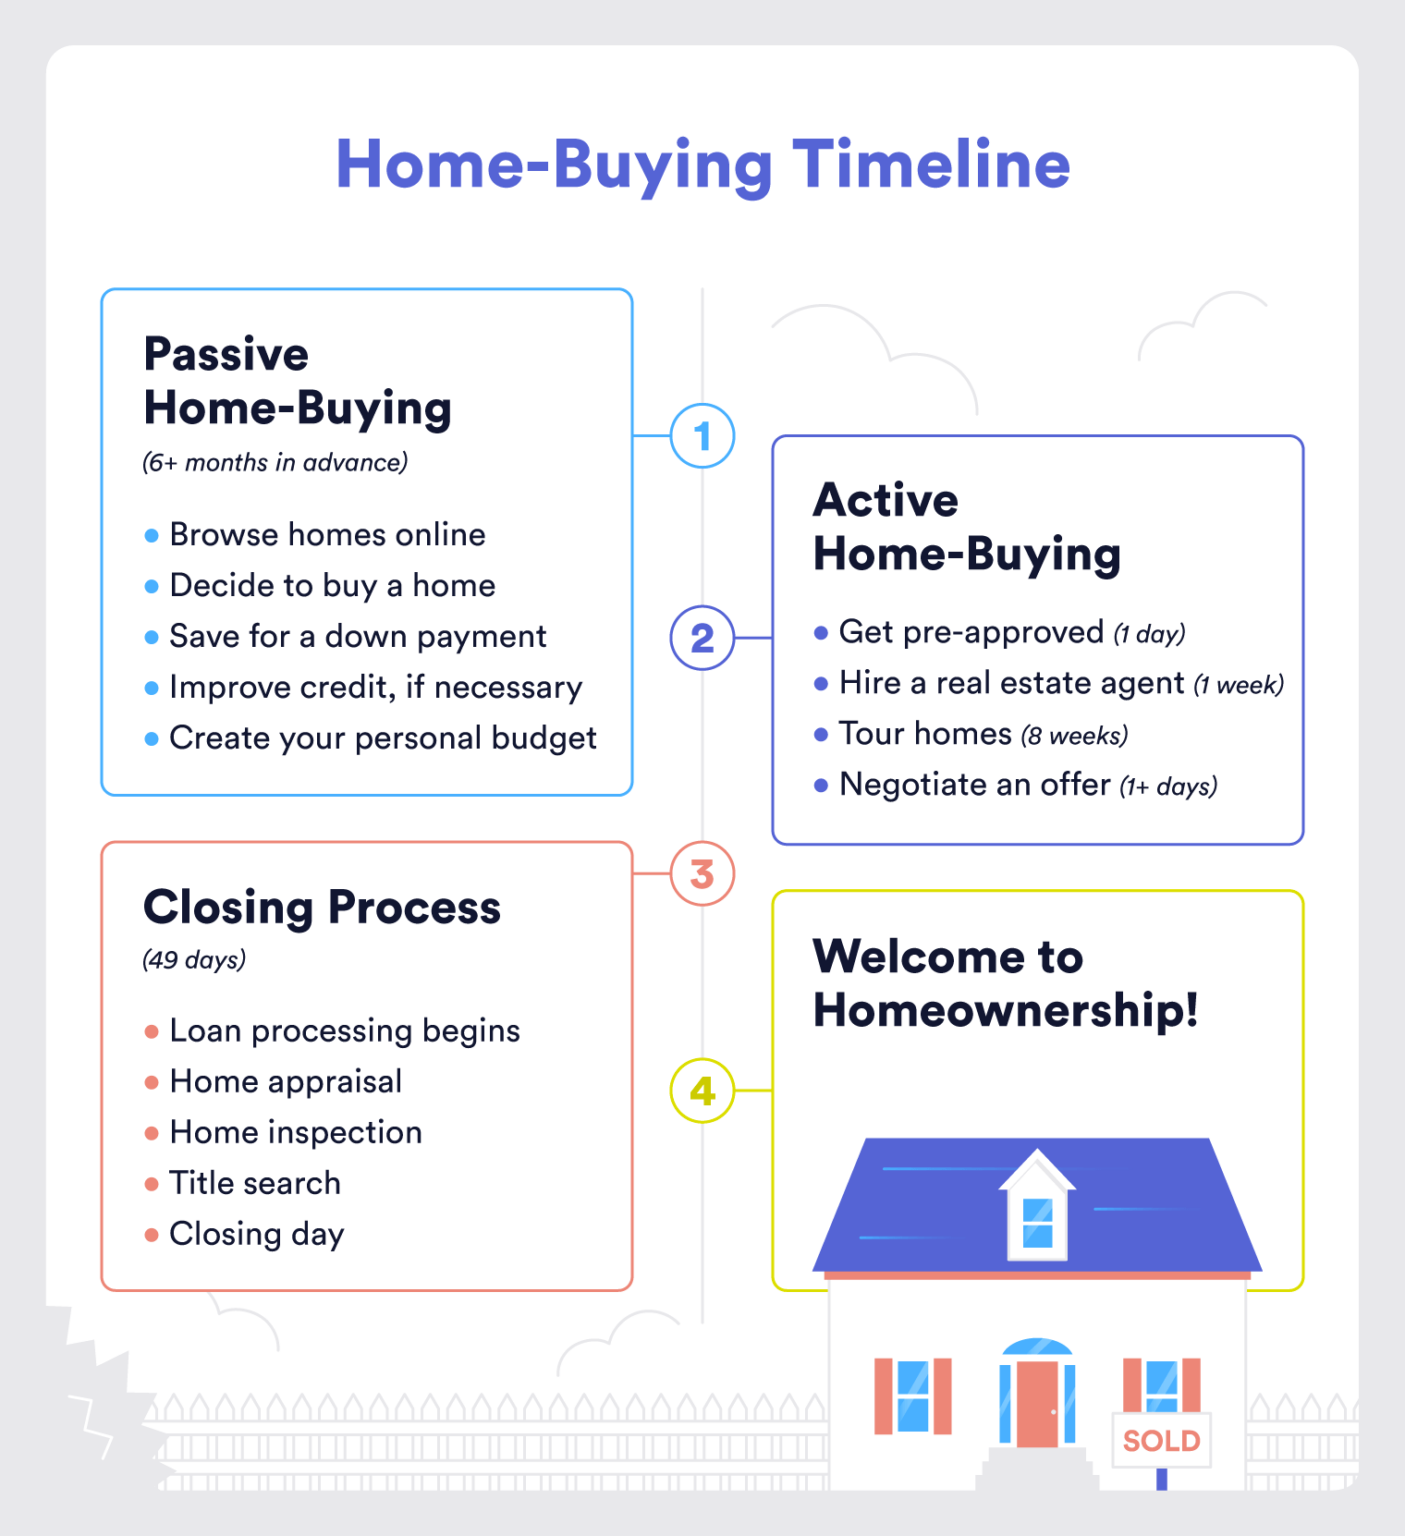 A Simple Home Buying Timeline for FirstTime Buyers